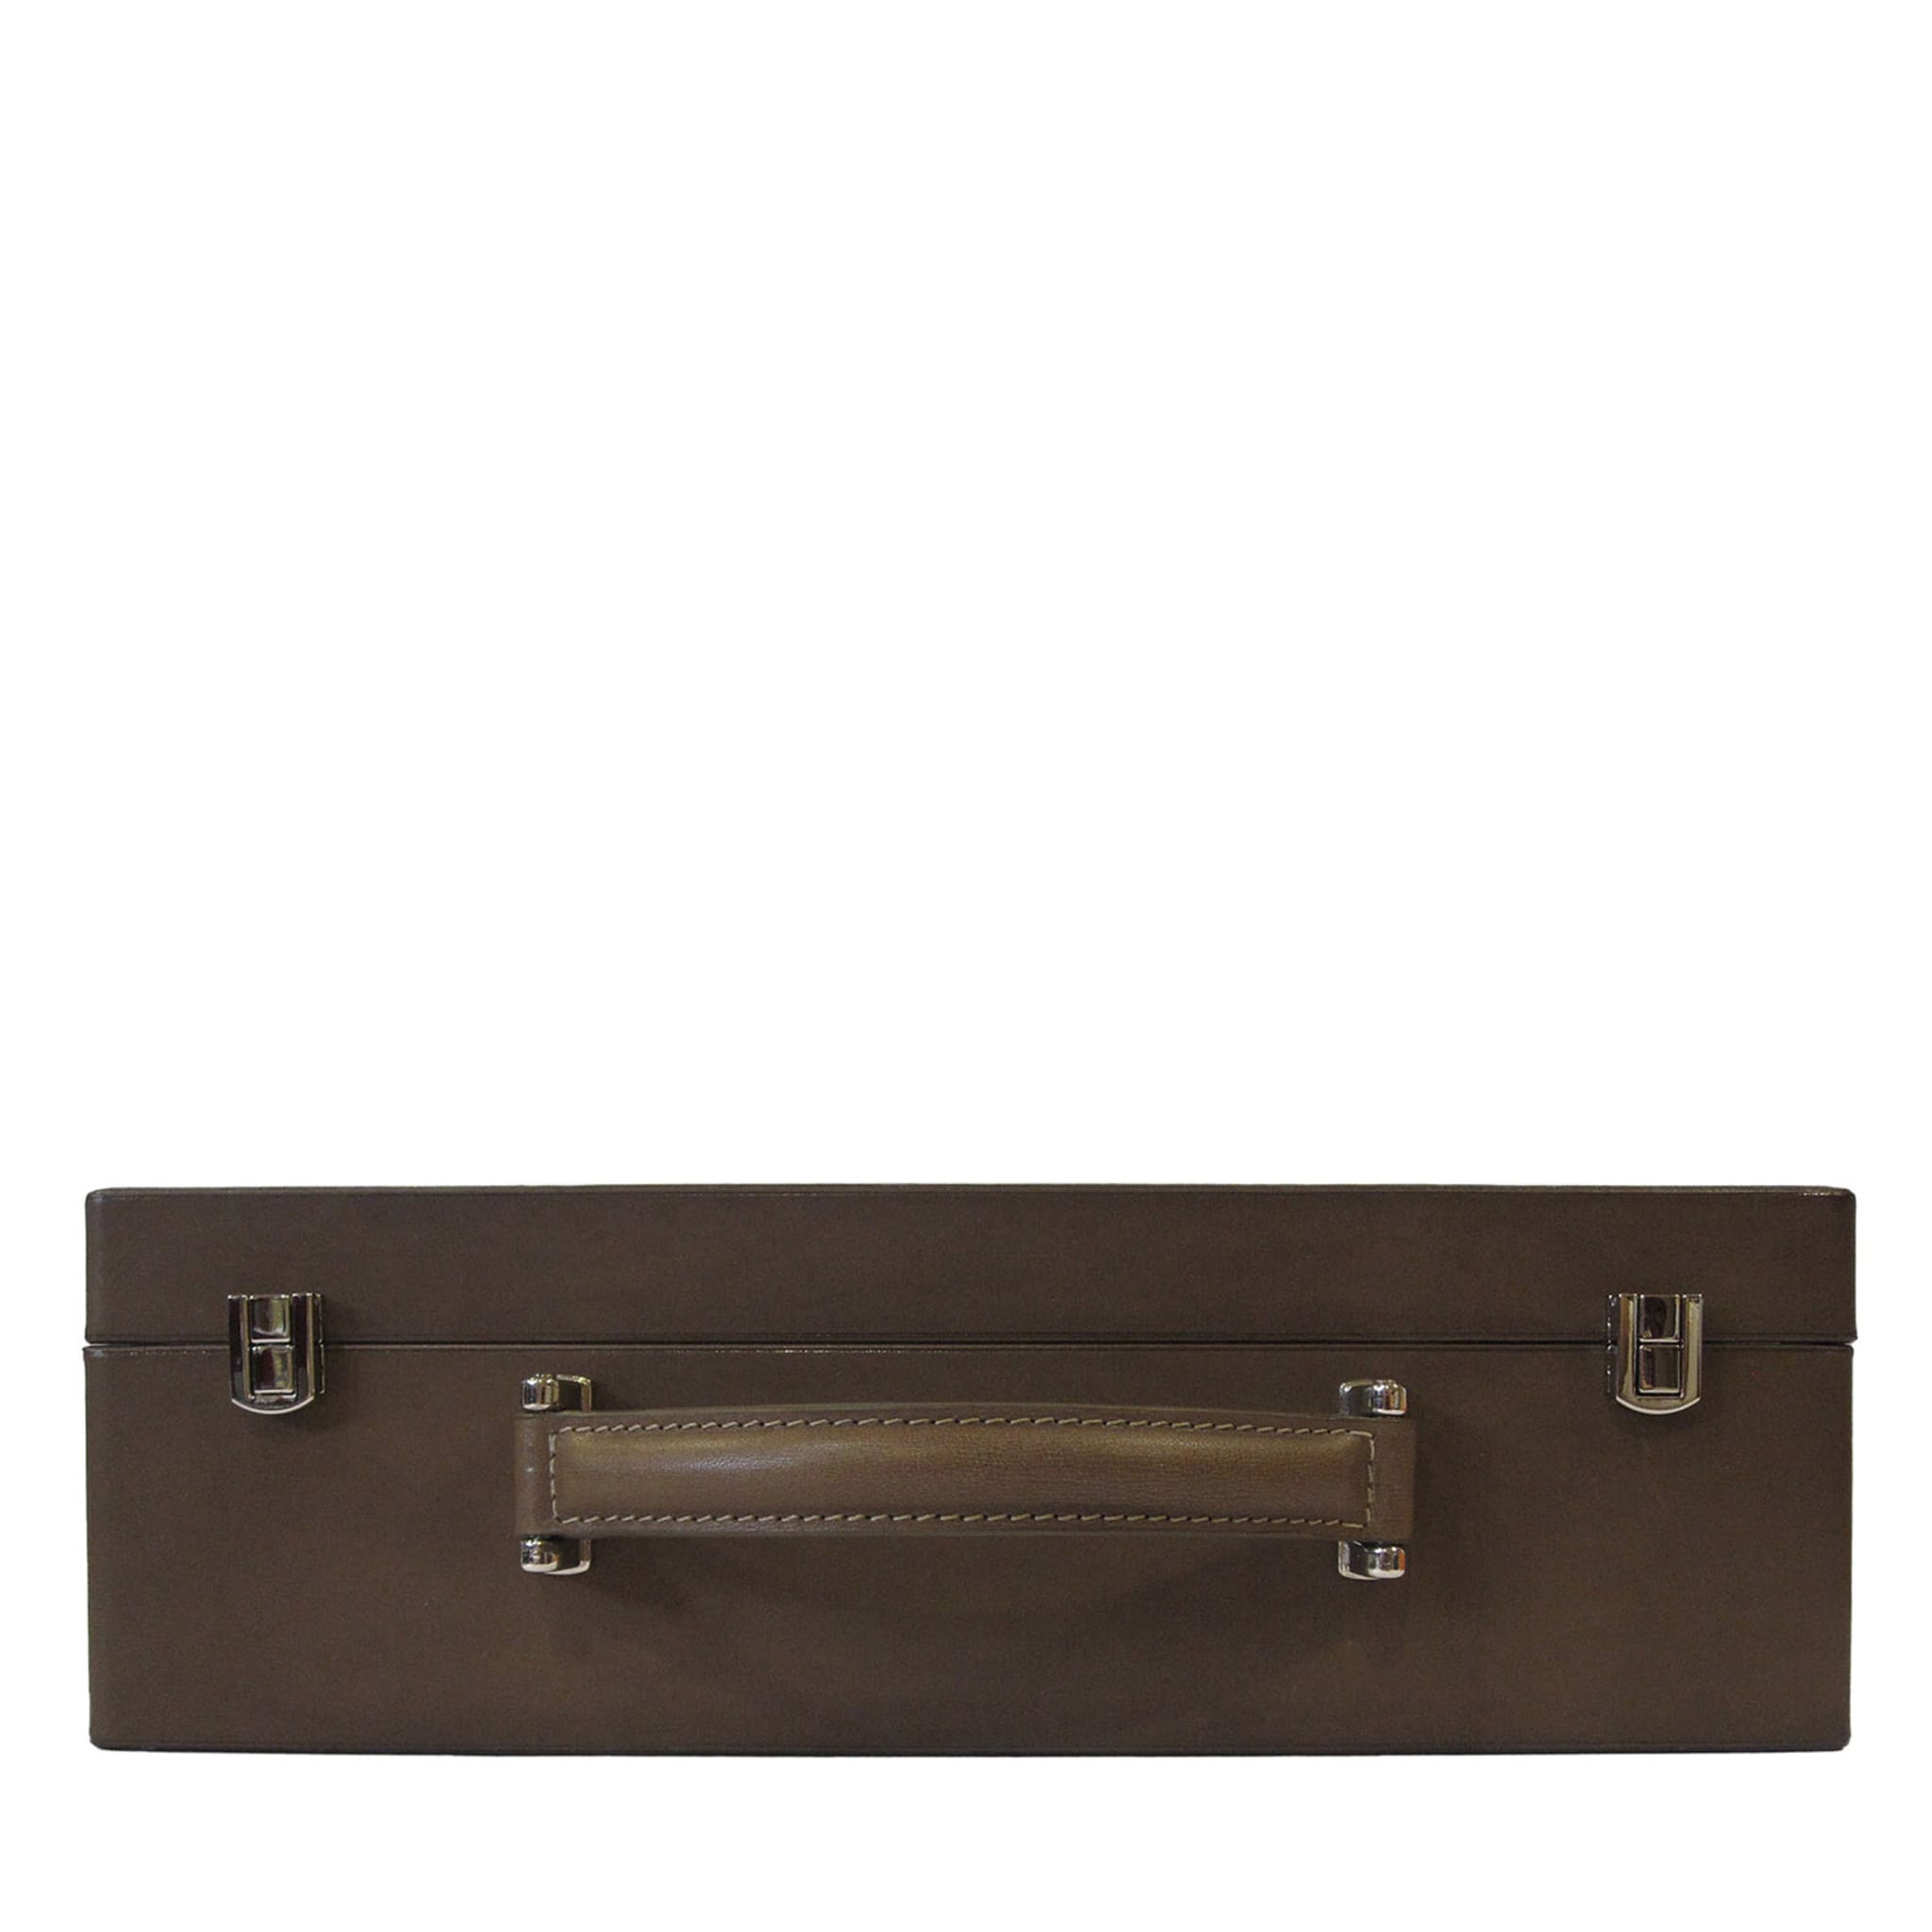 Small Leather Trunk #2 - Main view